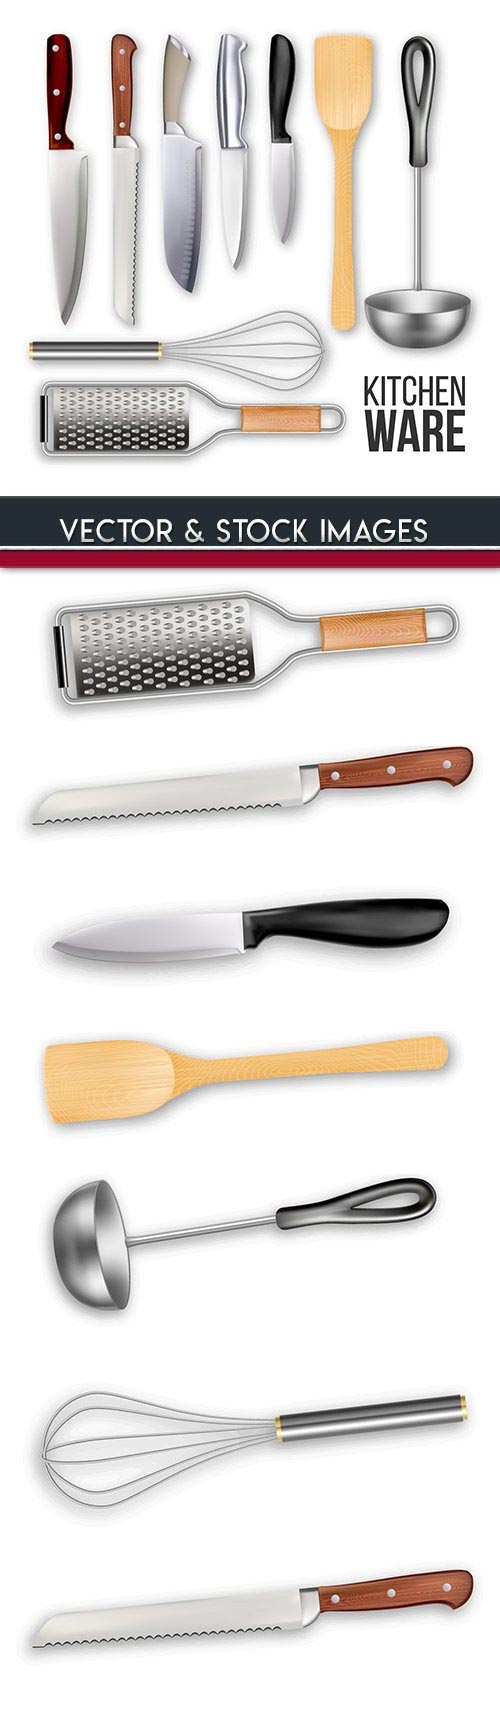 Kitchen accessories for cooking 3d illustrations